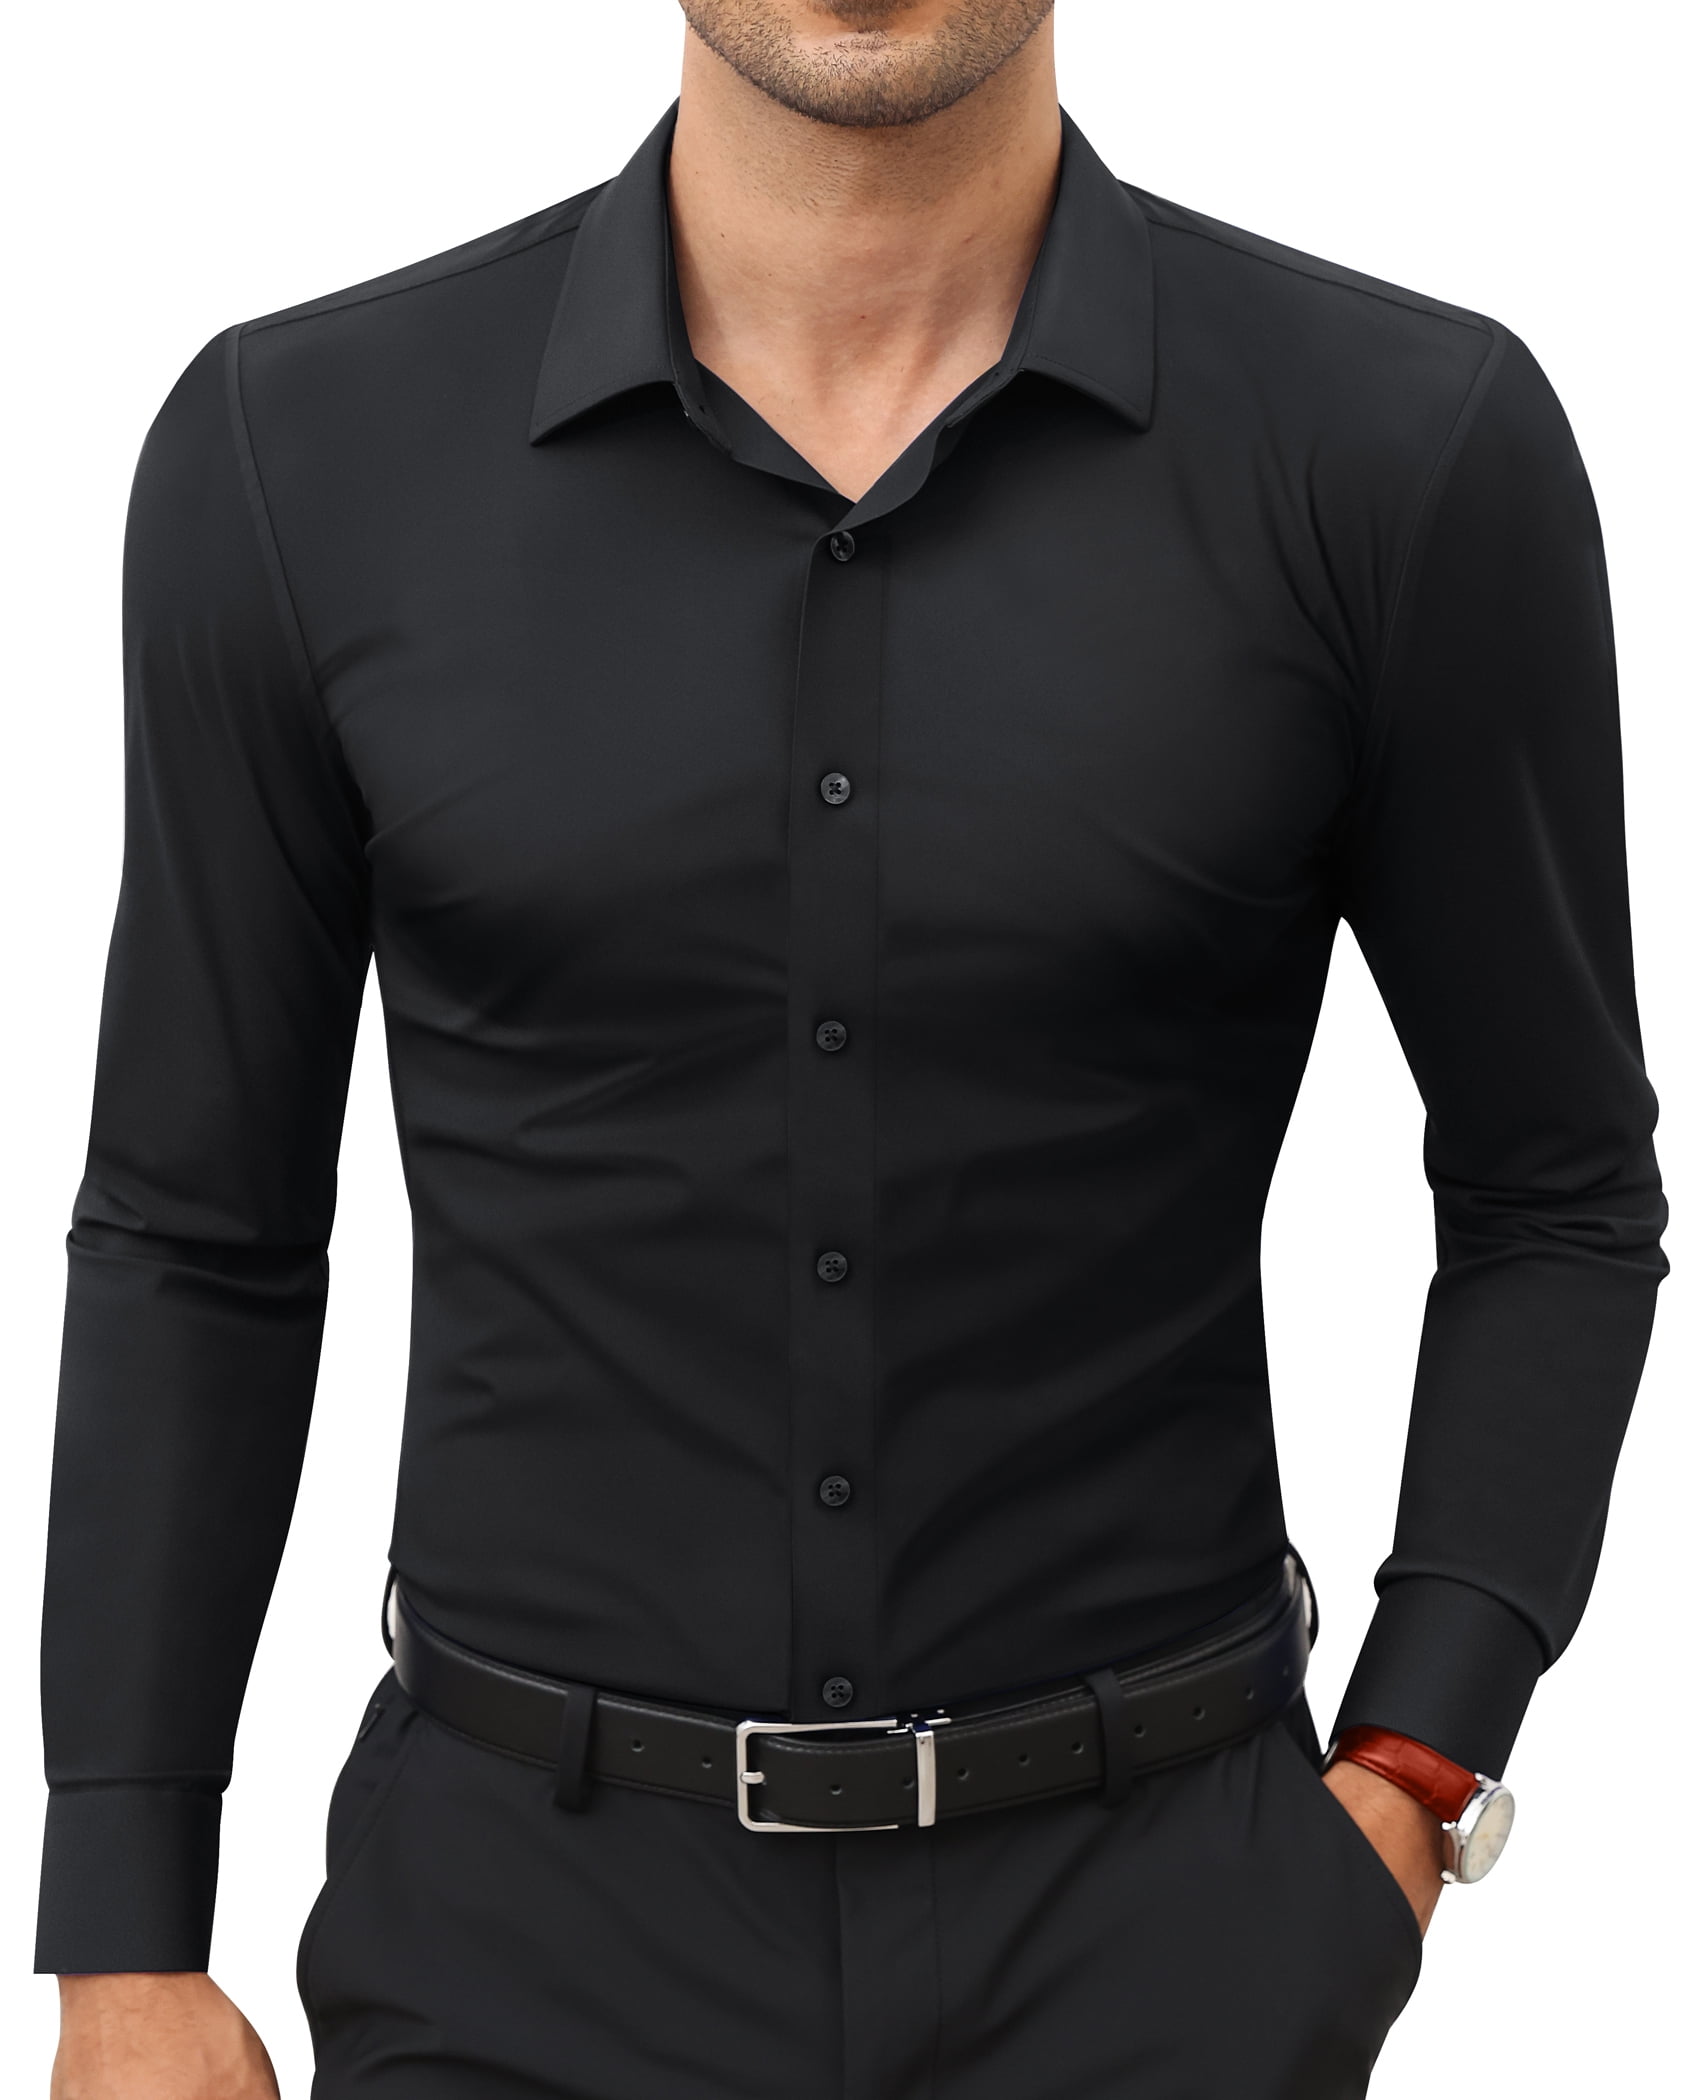 Alimens & Gentle Long Sleeve Stretch Dress Shirts for Men Button Down ...